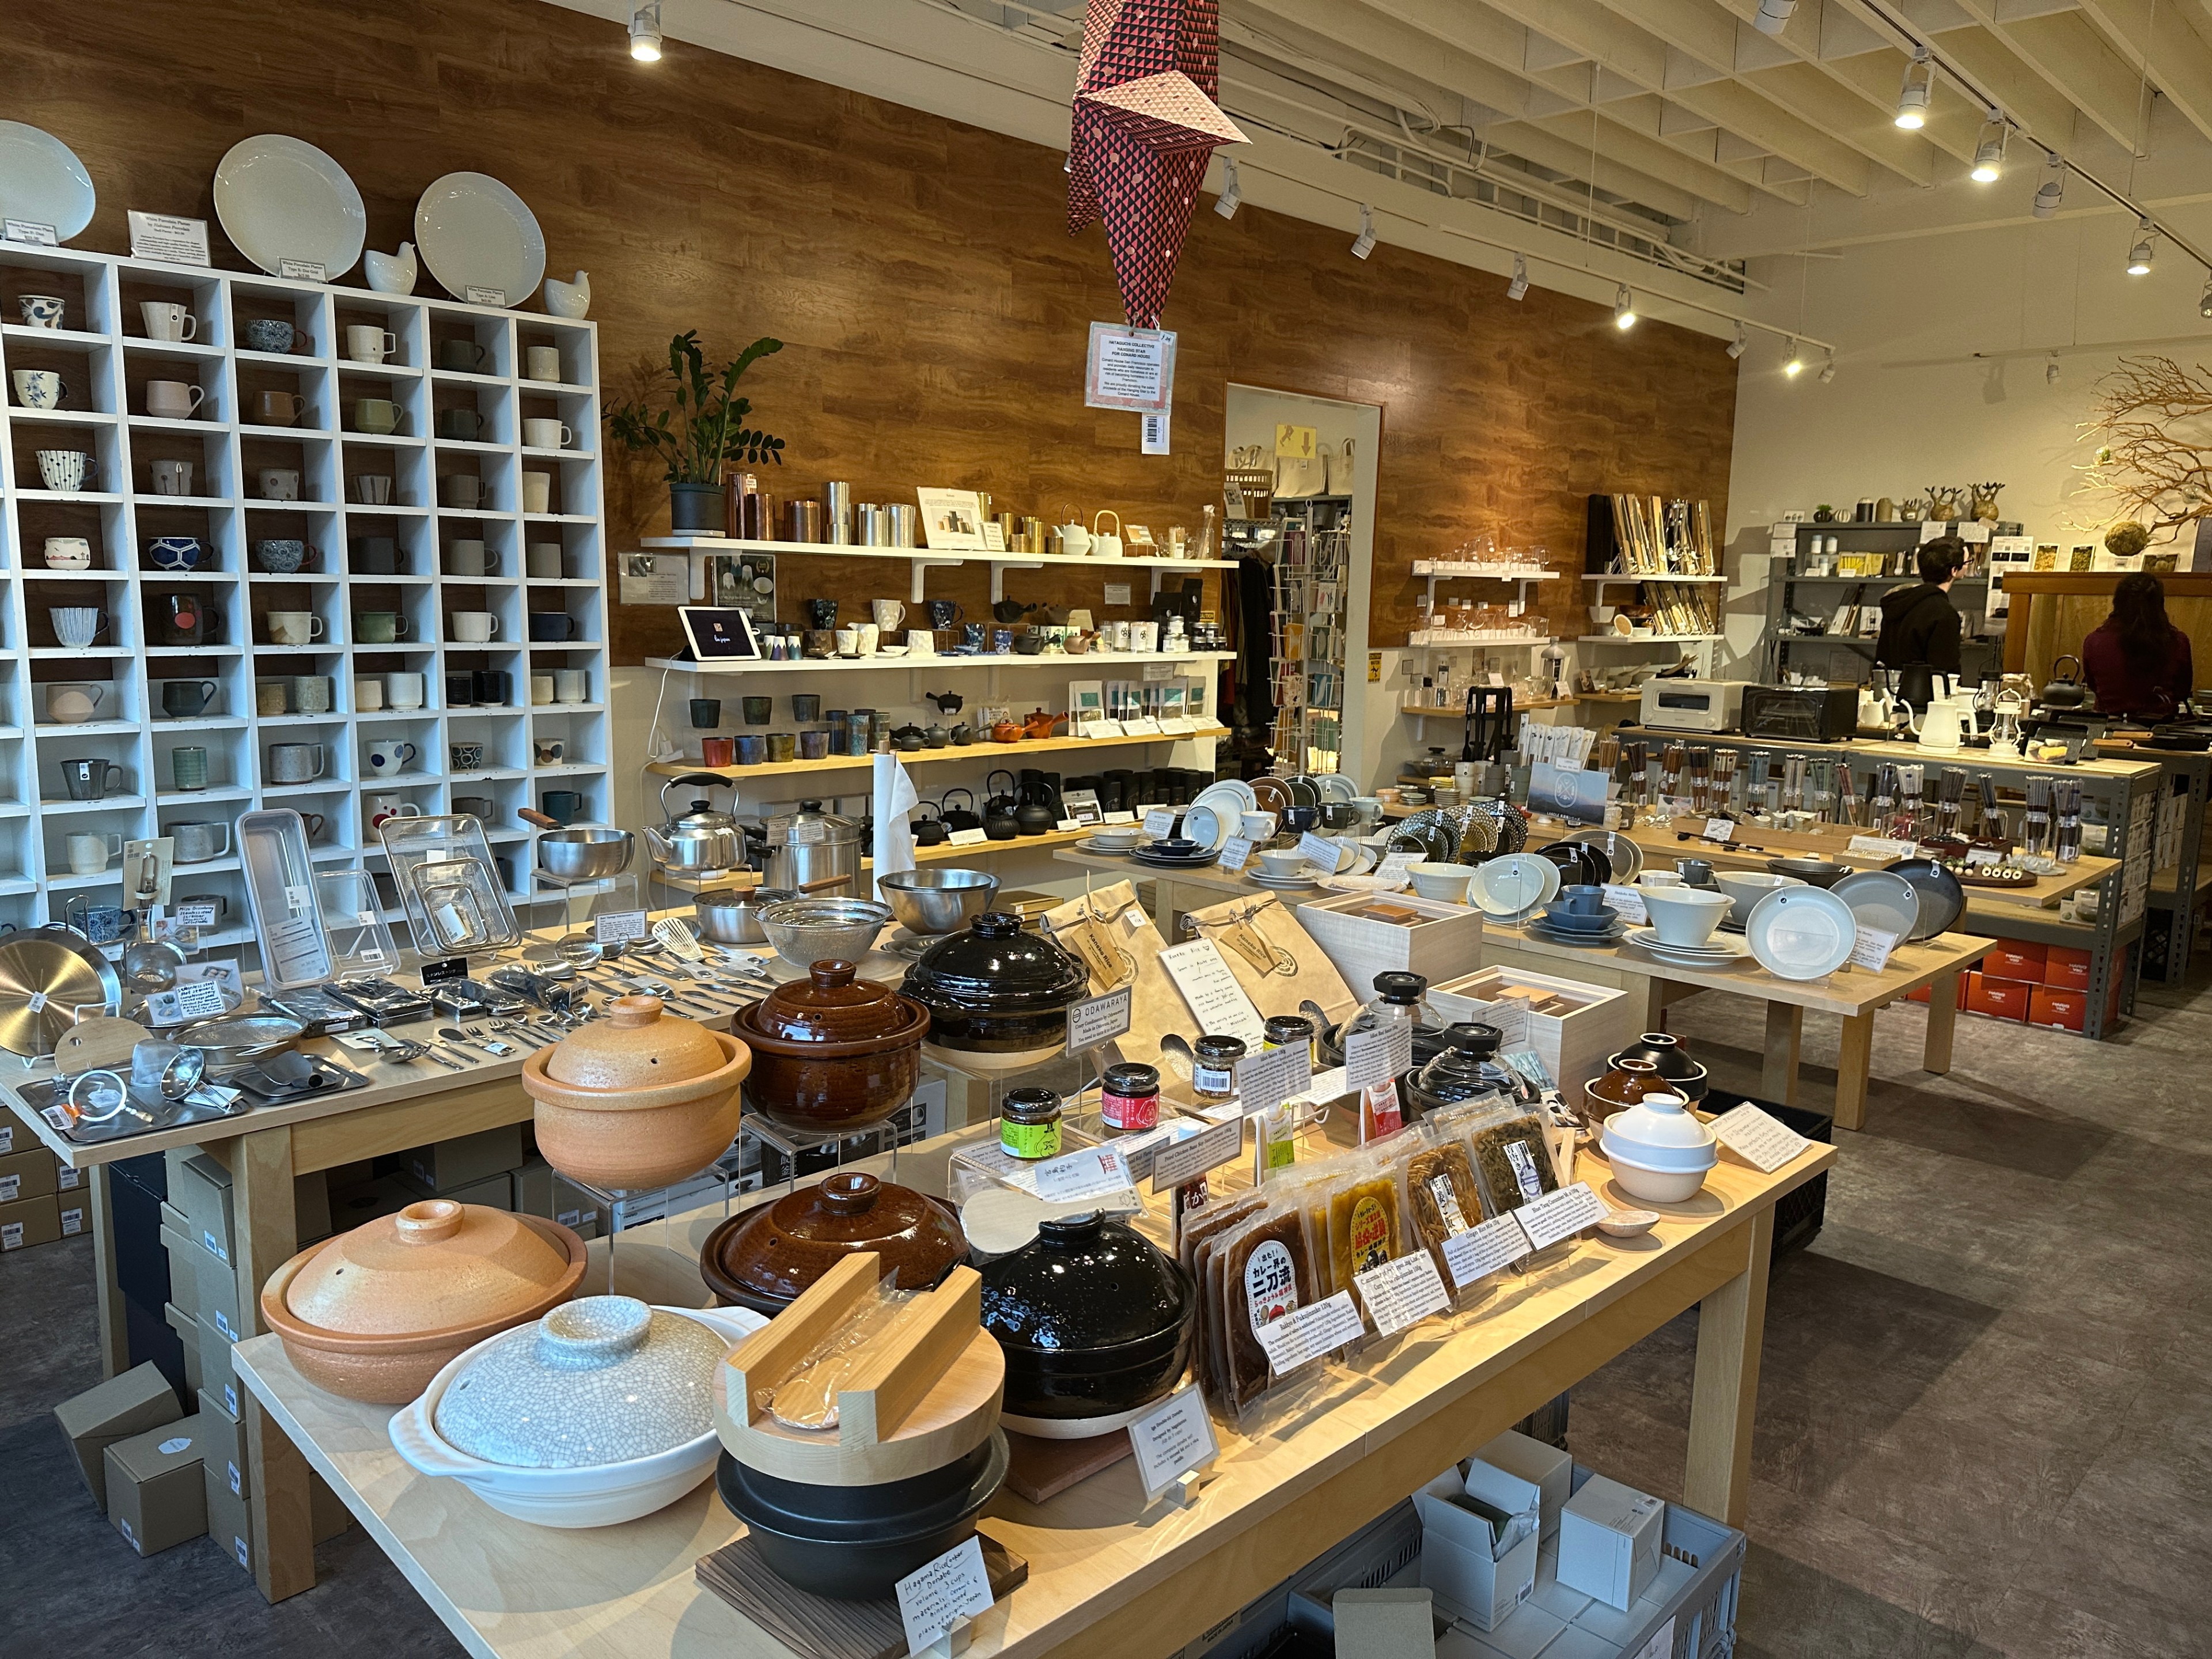 Ceramics, plates and bowls fill a Japanese cookware shop in San Francisco's Japantown.